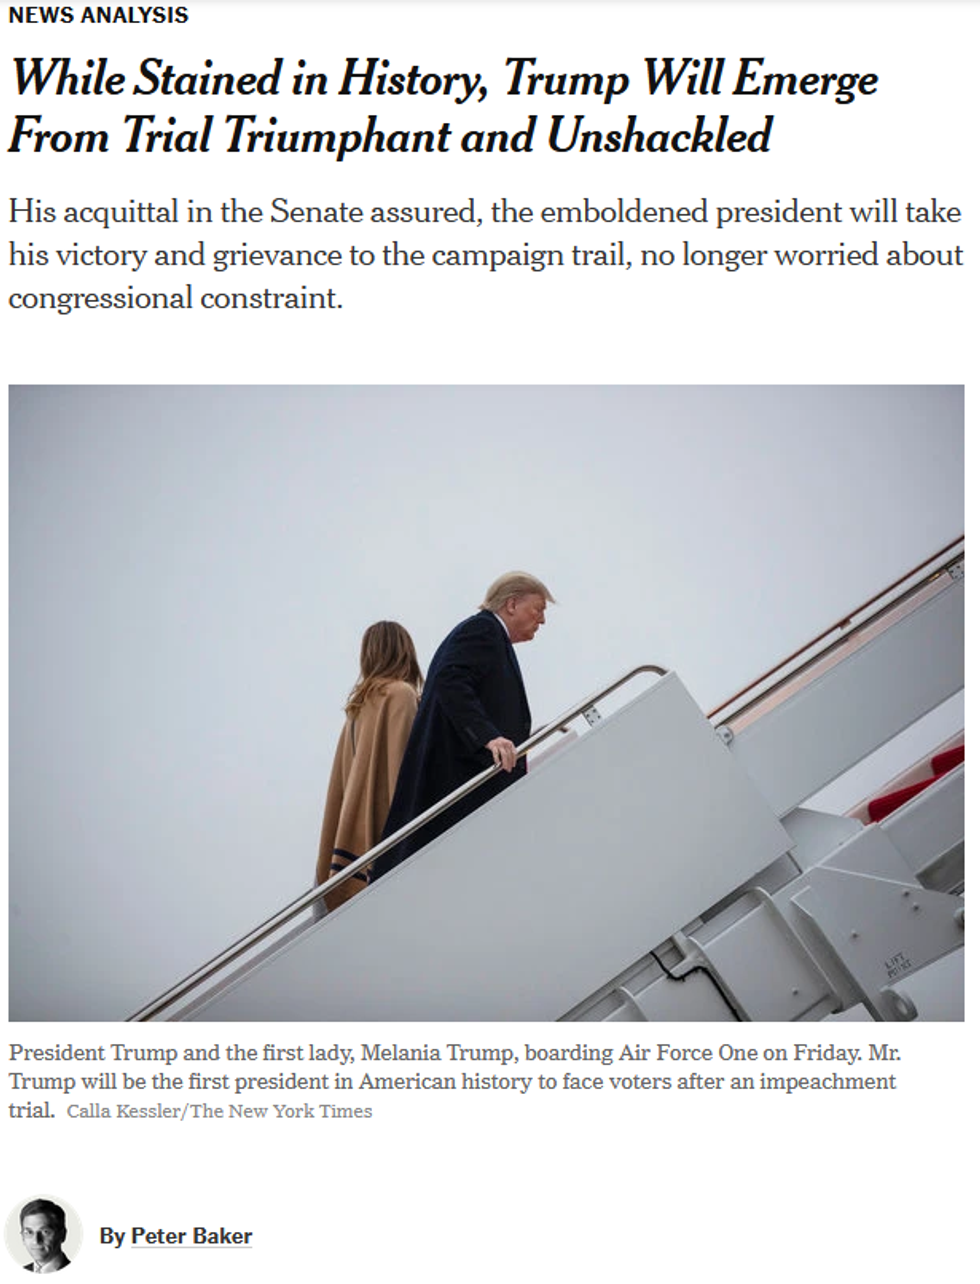 NYT: While Stained in History, Trump Will Emerge From Trial Triumphant and Unshackled